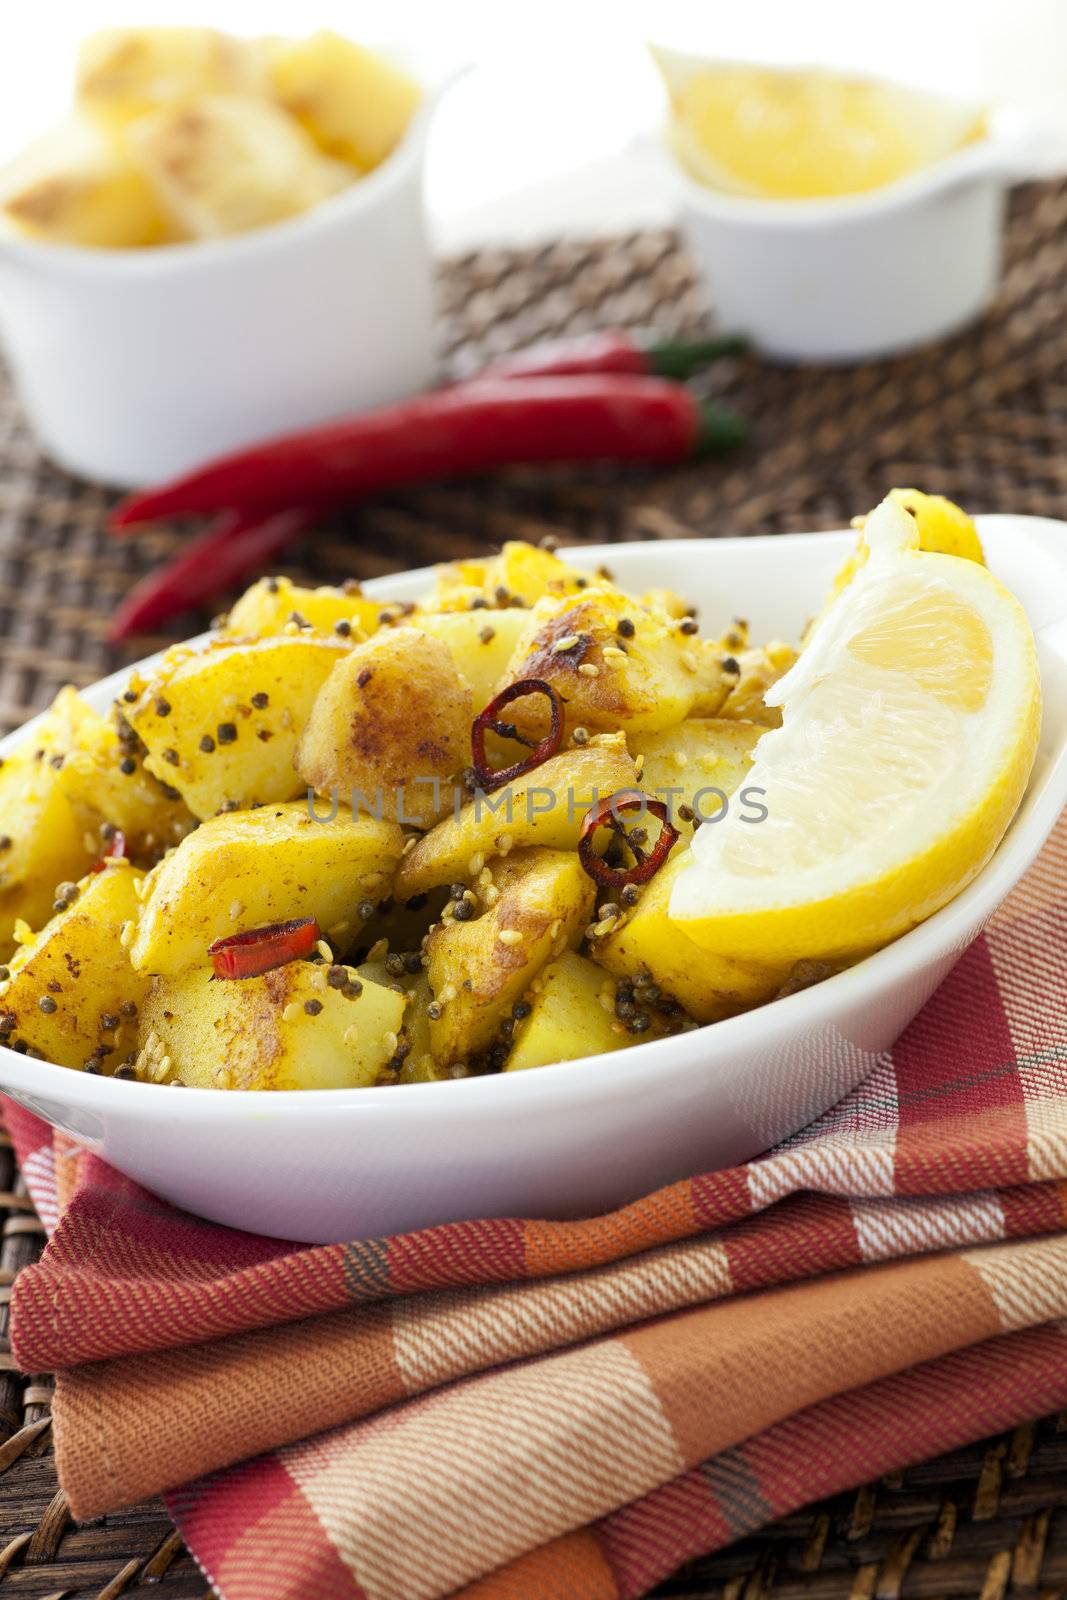 Spicy Potatoes with mustard seeds, sesame seeds, chili peppers and other spices, served with a slice of lemon.